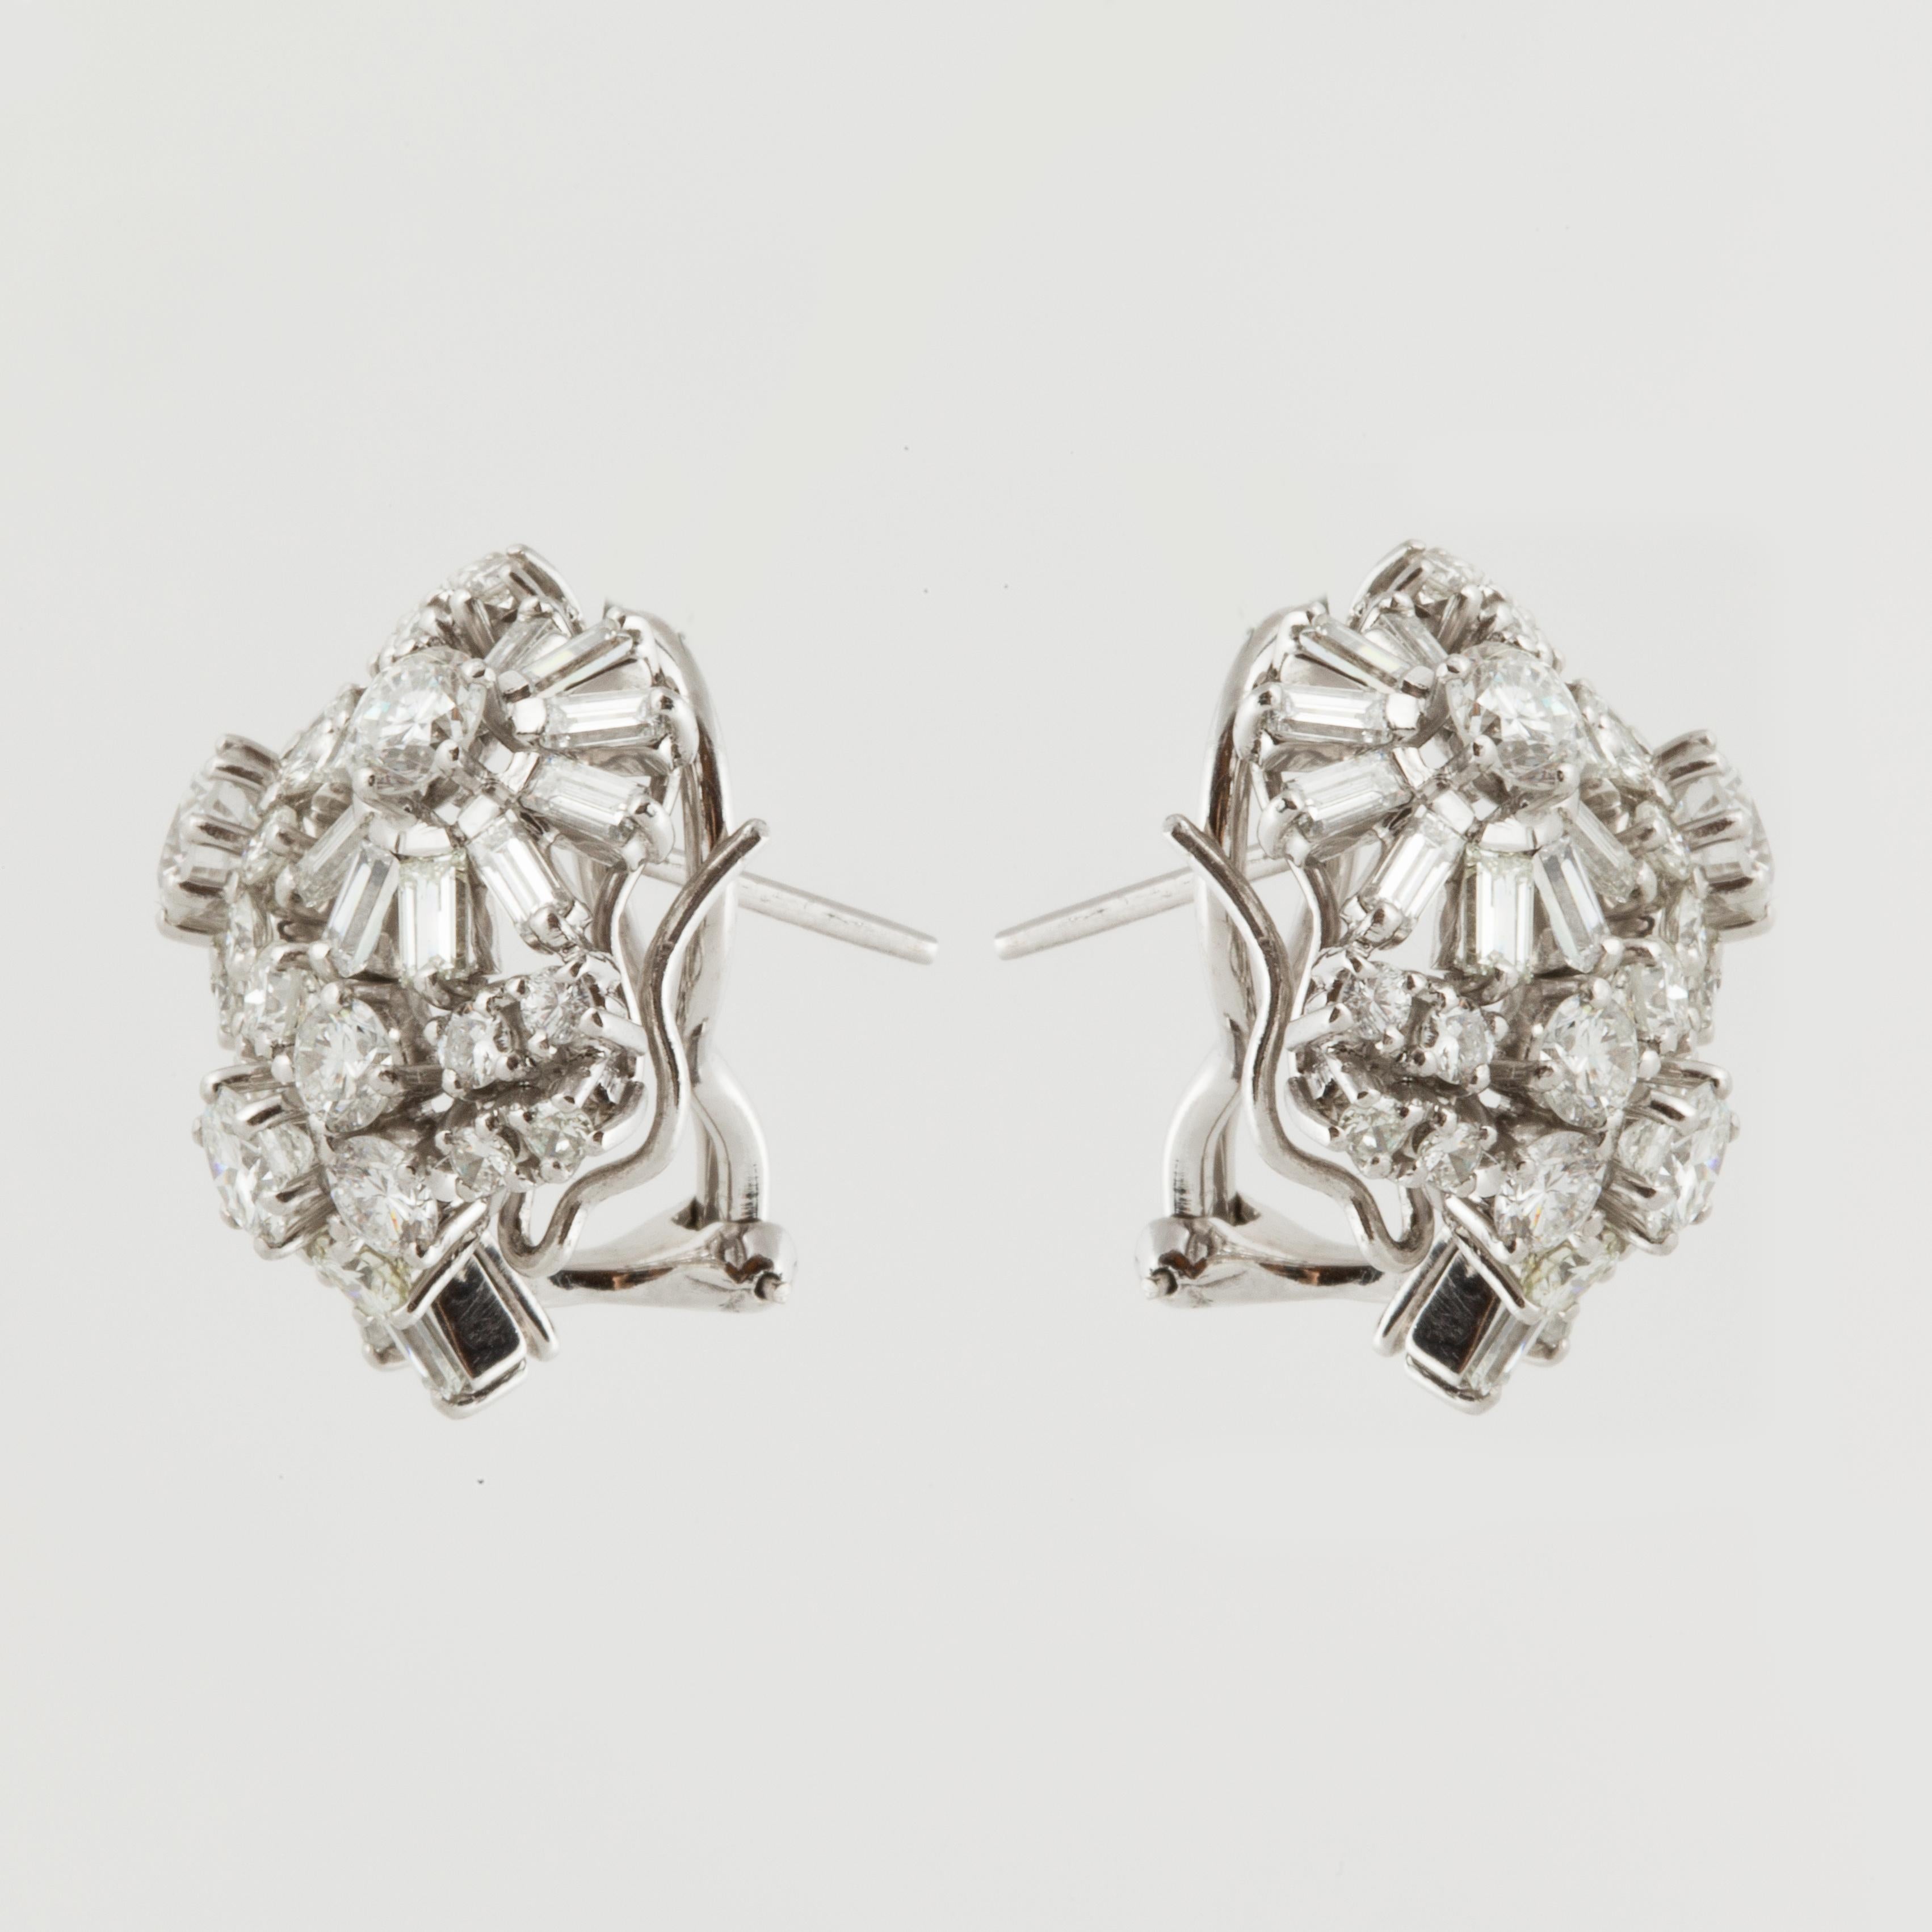 1950s platinum diamond cluster earrings featuring an open frame floral inspired motif studded with 28 baguette-cut and 52 round brilliant-cut diamonds.  The diamonds total 5.15 carats, G-I color and VS1-I2 clarity.  Measure 7/8 inches long and 3/4